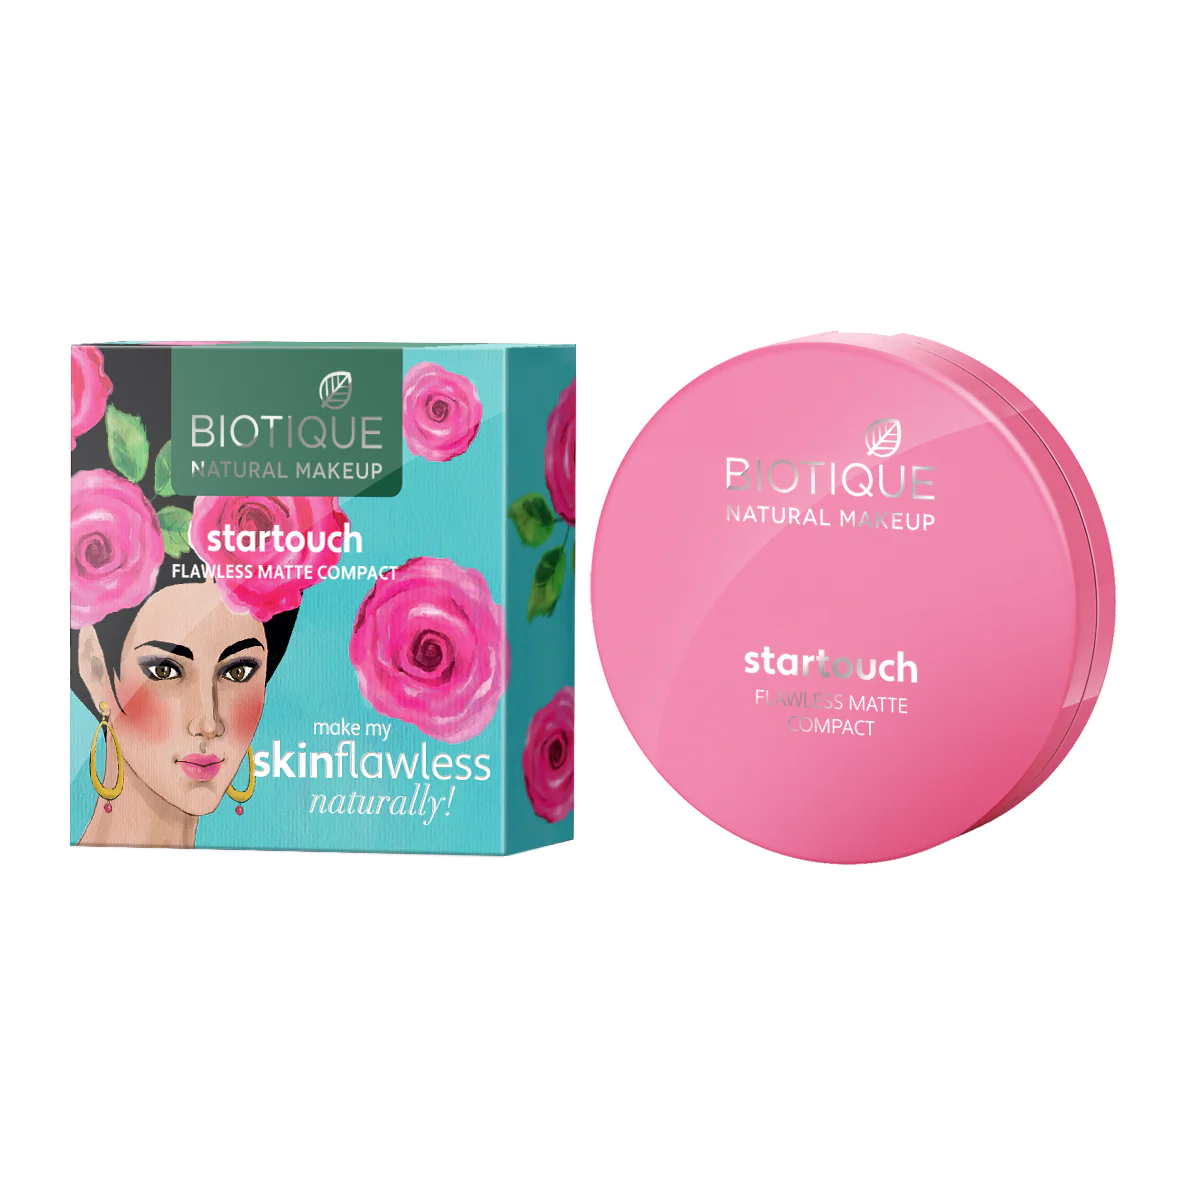 Biotique Natural Makeup Startouch Flawless Matte Compact, Tawny Nutmeg, 9g